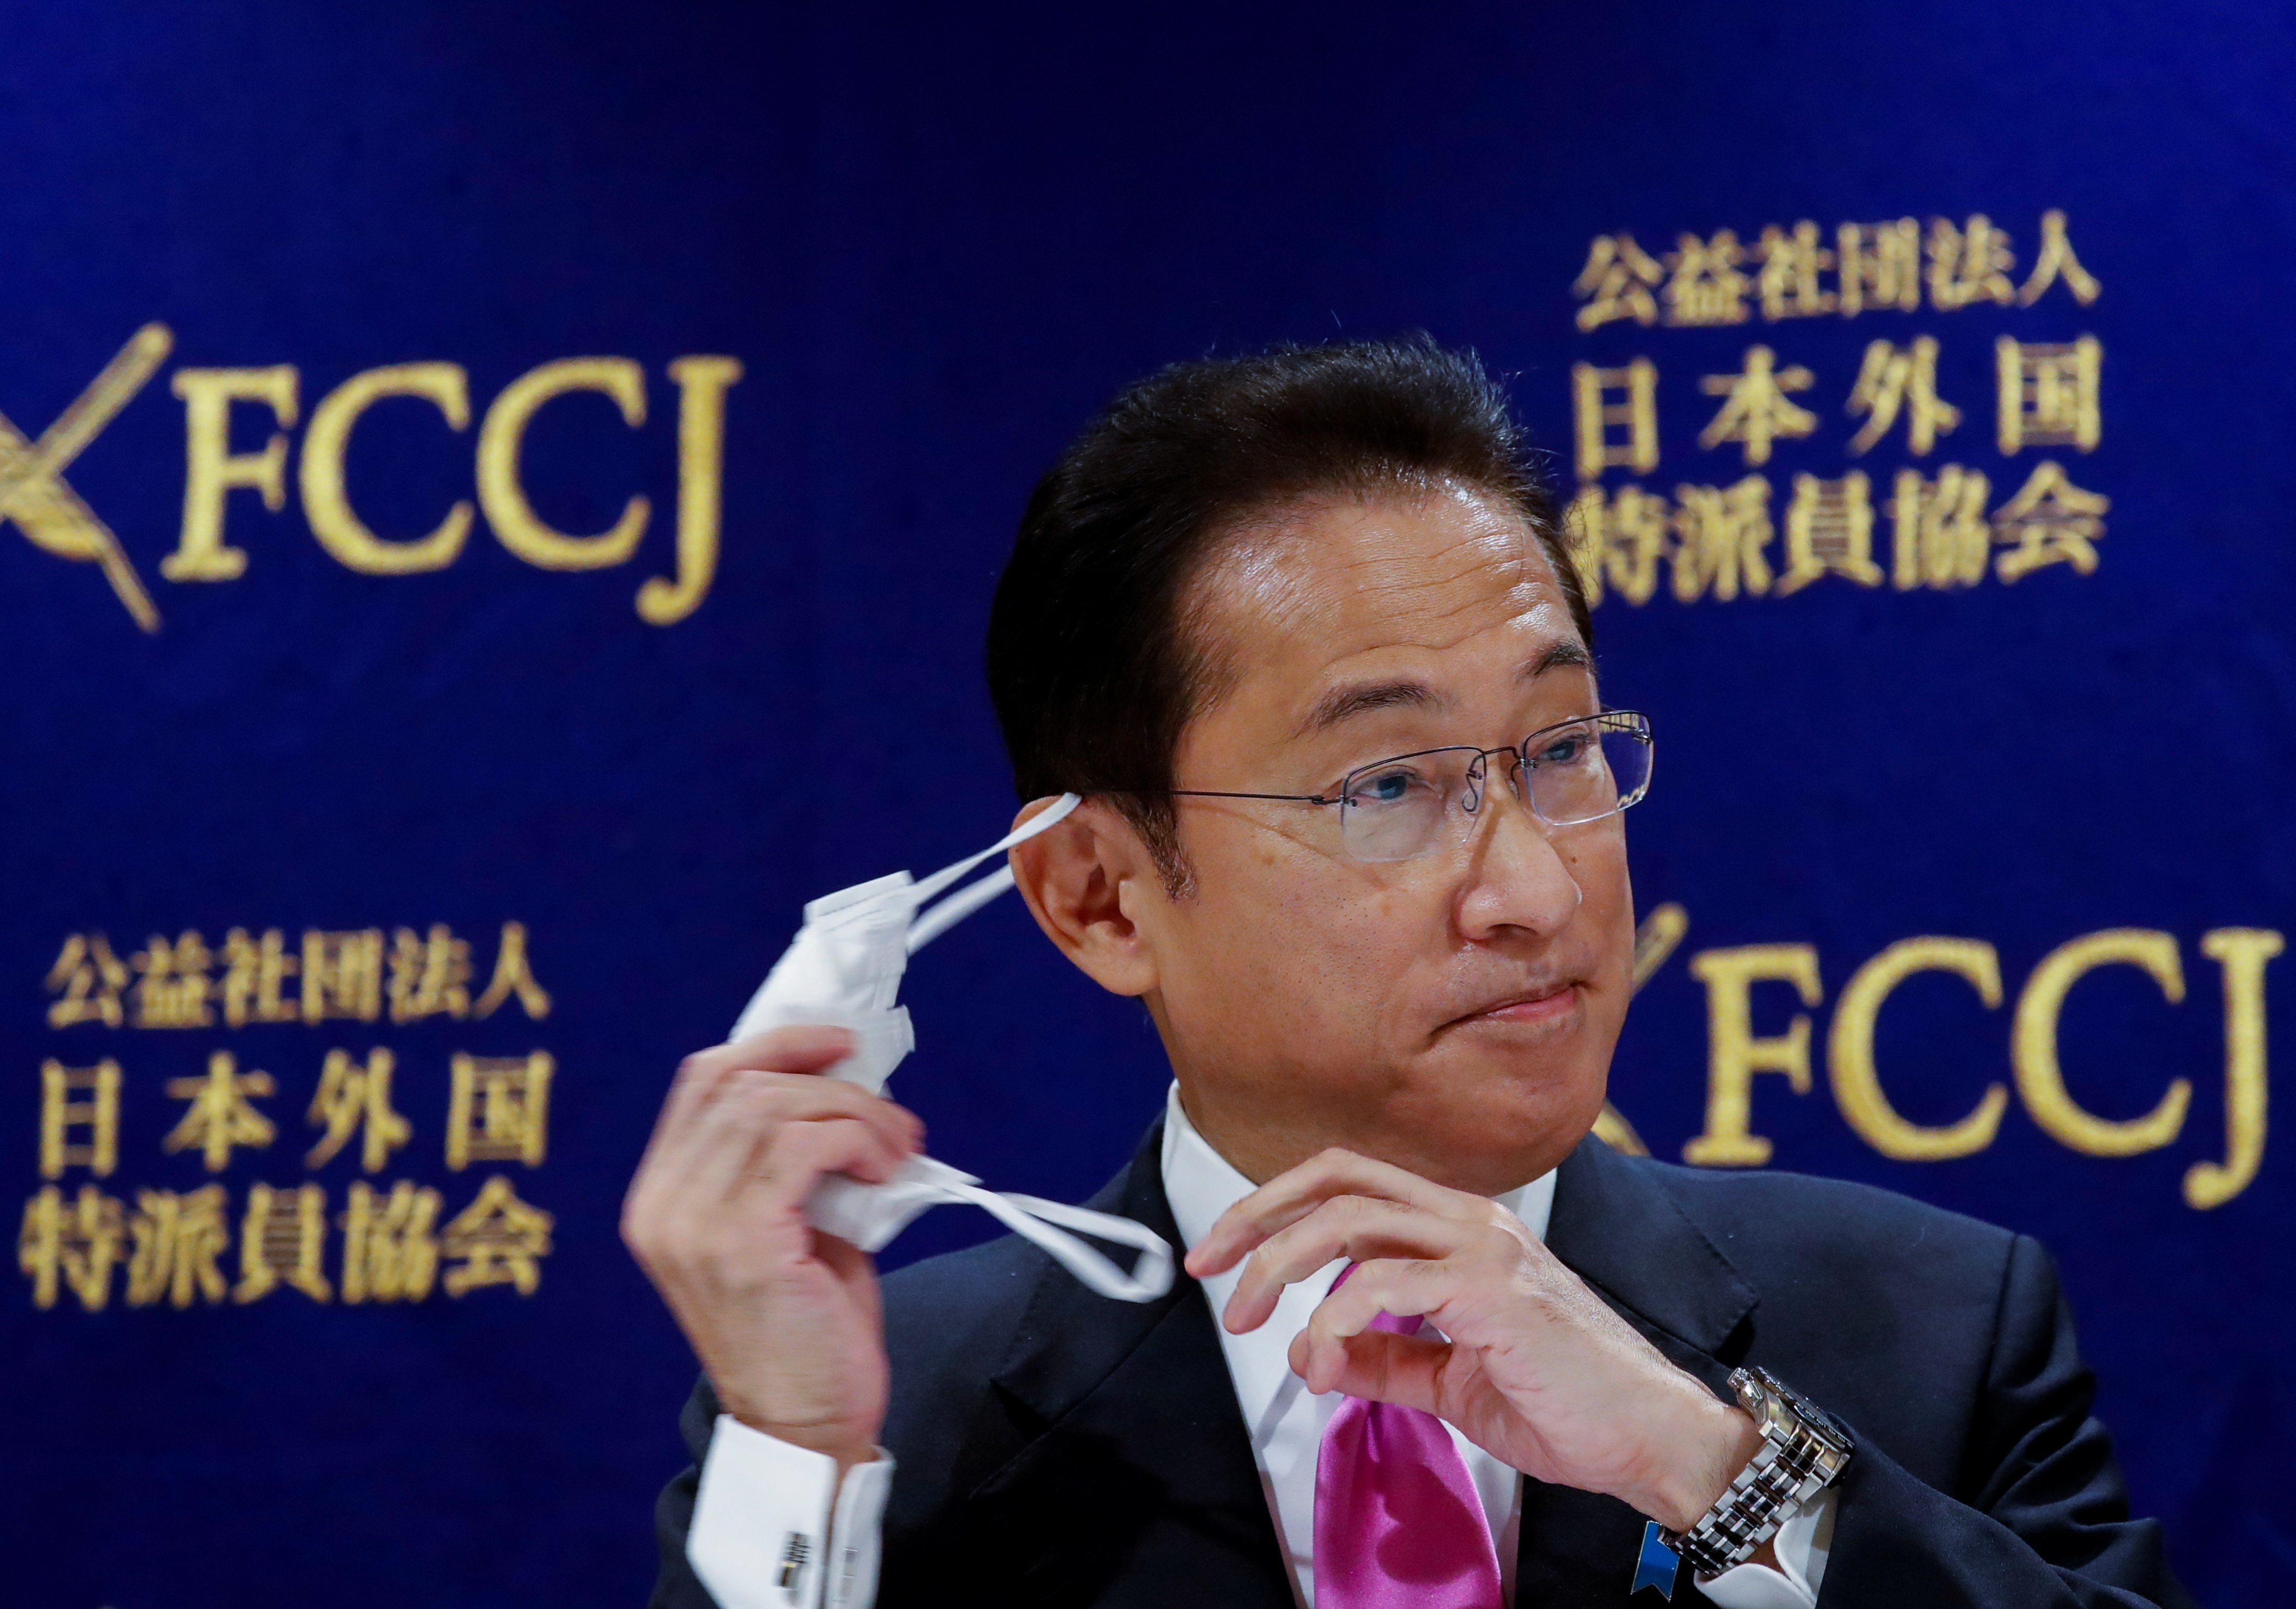 Japan PM contender Kishida aims to boost security with China in mind